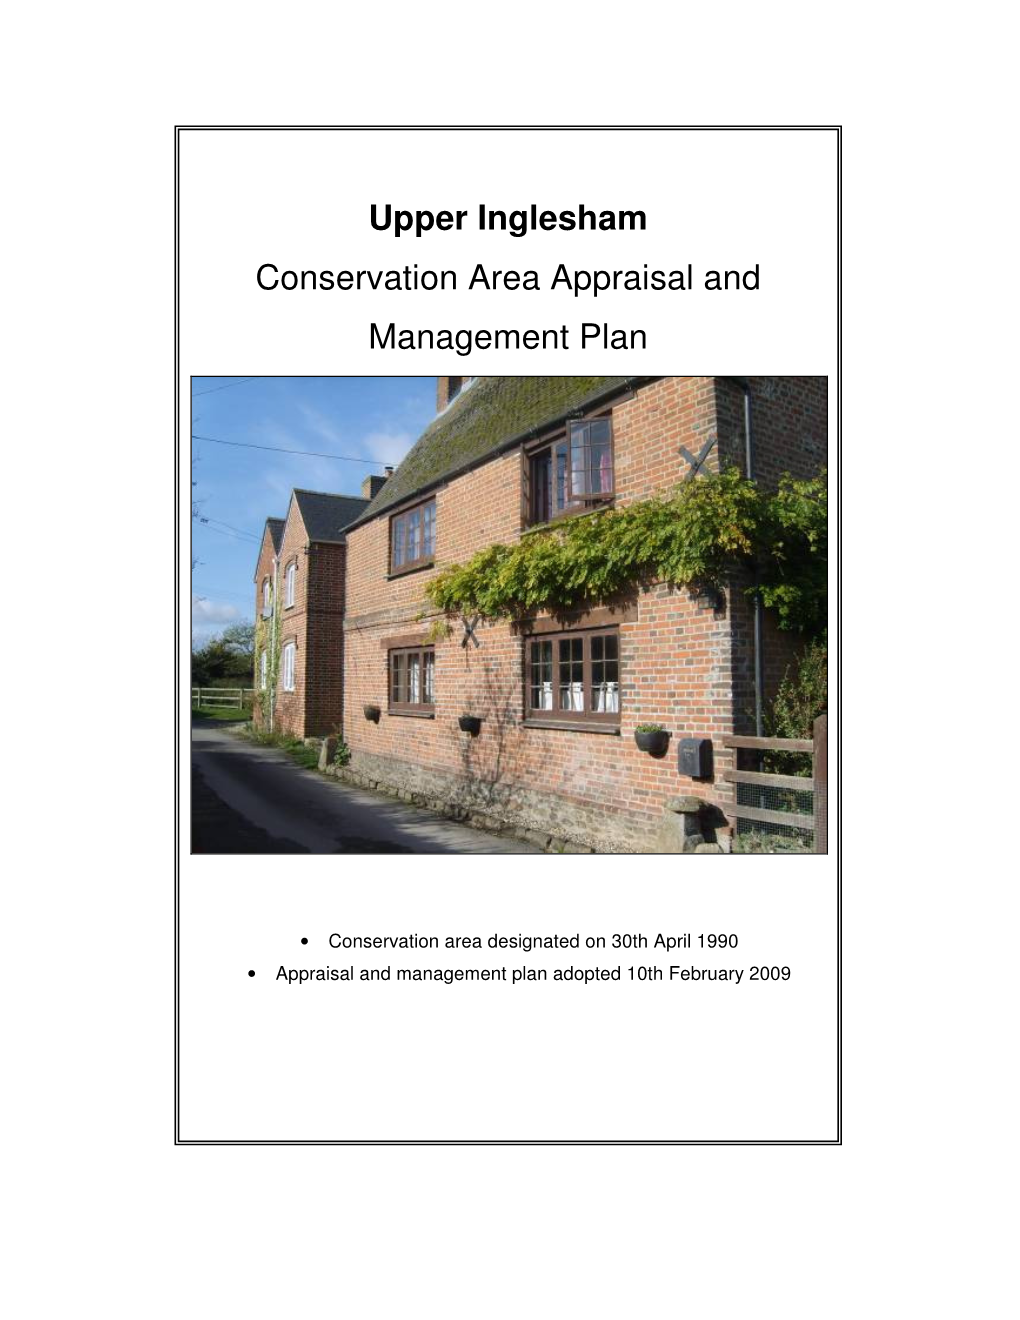 Conservation Area Appraisal and Management Plan